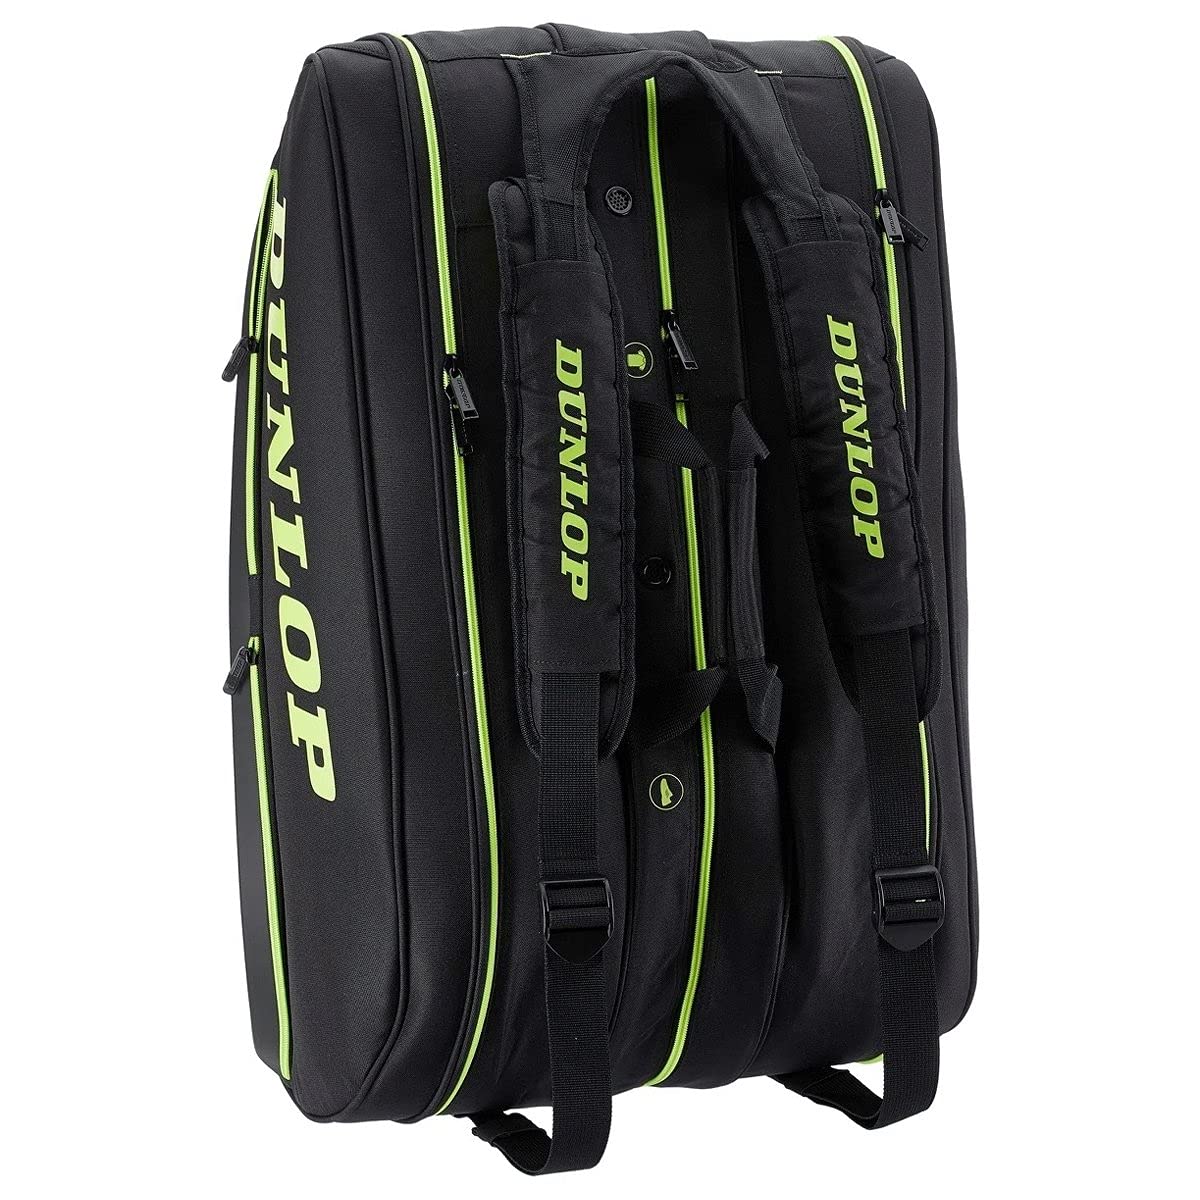 DUNLOP SX Performance 12 Pack Thermo Tennis Bag Black and Yellow